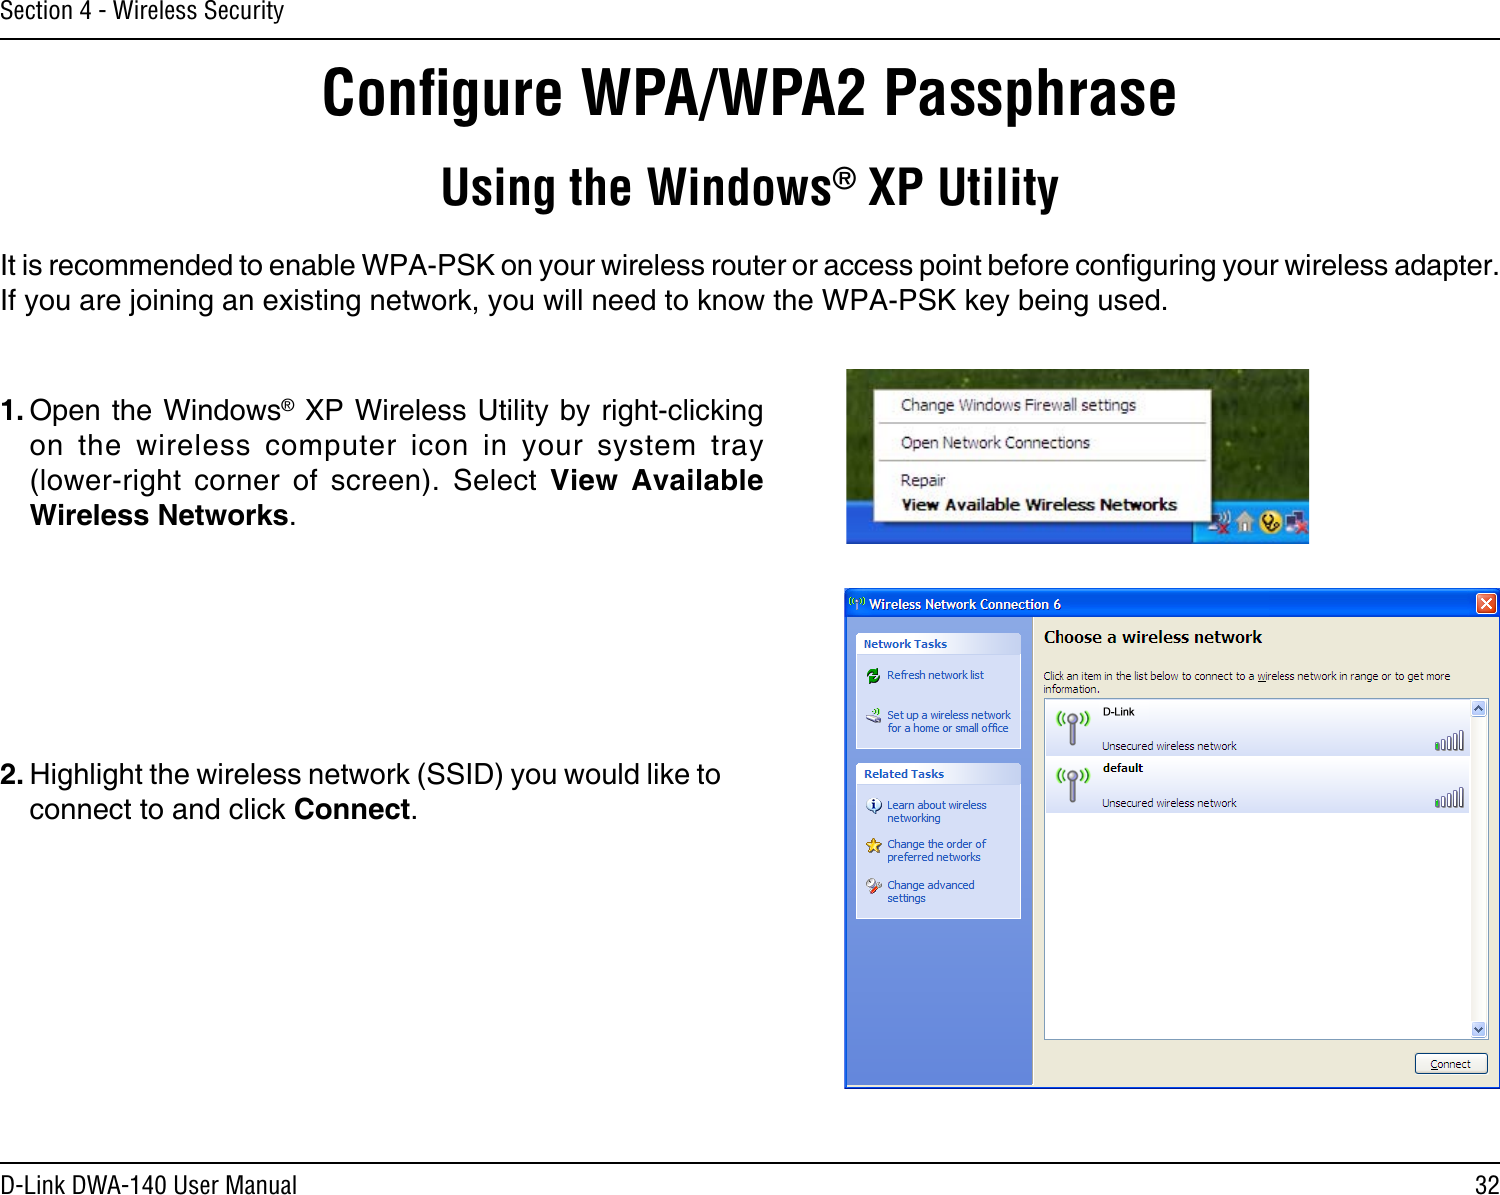 32D-Link DWA-140 User ManualSection 4 - Wireless SecurityConﬁgure WPA/WPA2 PassphraseUsing the Windows® XP UtilityIt is recommended to enable WPA-PSK on your wireless router or access point before conguring your wireless adapter. If you are joining an existing network, you will need to know the WPA-PSK key being used.2. Highlight the wireless network (SSID) you would like to connect to and click Connect.1. Open the Windows® XP Wireless Utility by right-clicking on  the  wireless  computer  icon  in  your  system  tray  (lower-right  corner  of  screen).  Select  View  Available Wireless Networks. 